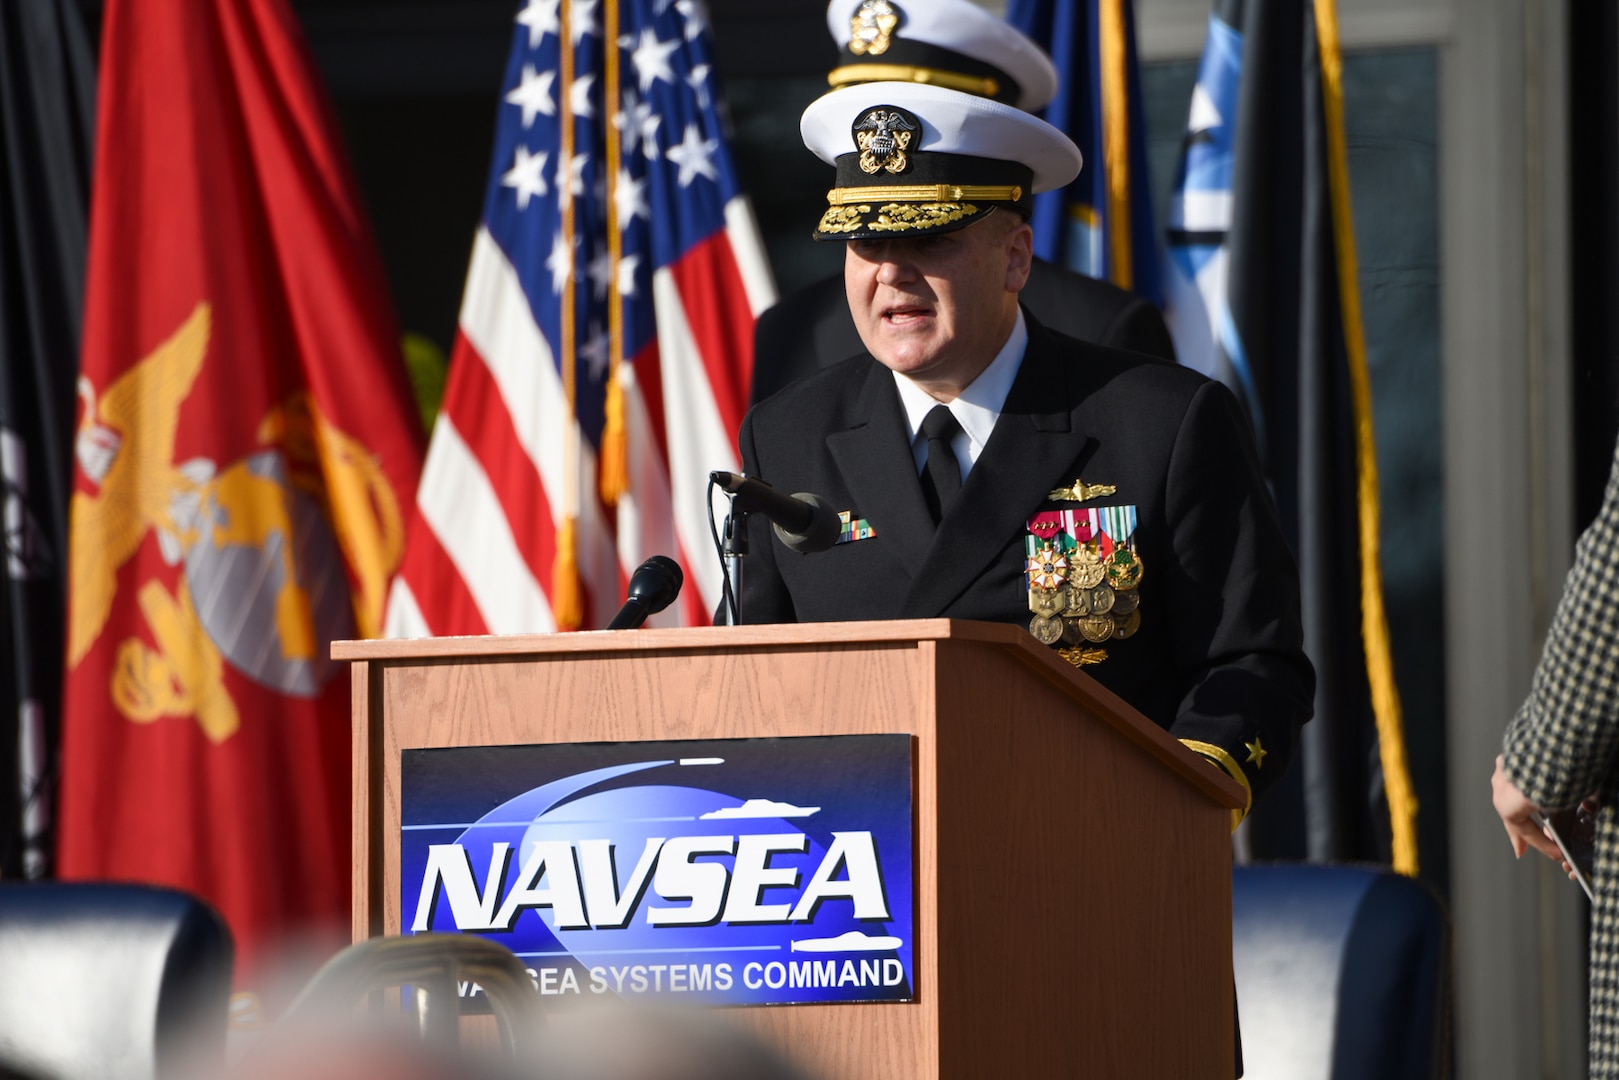 WASHINGTON -- Rear Adm. Thomas Anderson addresses the audience during the Naval Sea Systems Command change of command ceremony, held Jan. 3 at the Washington Navy Year. Vice Adm. James P. Downey assumed command from Anderson at NAVSEA's 46th commander. (Official US Navy photo by Laura Lakeway/RELEASED).